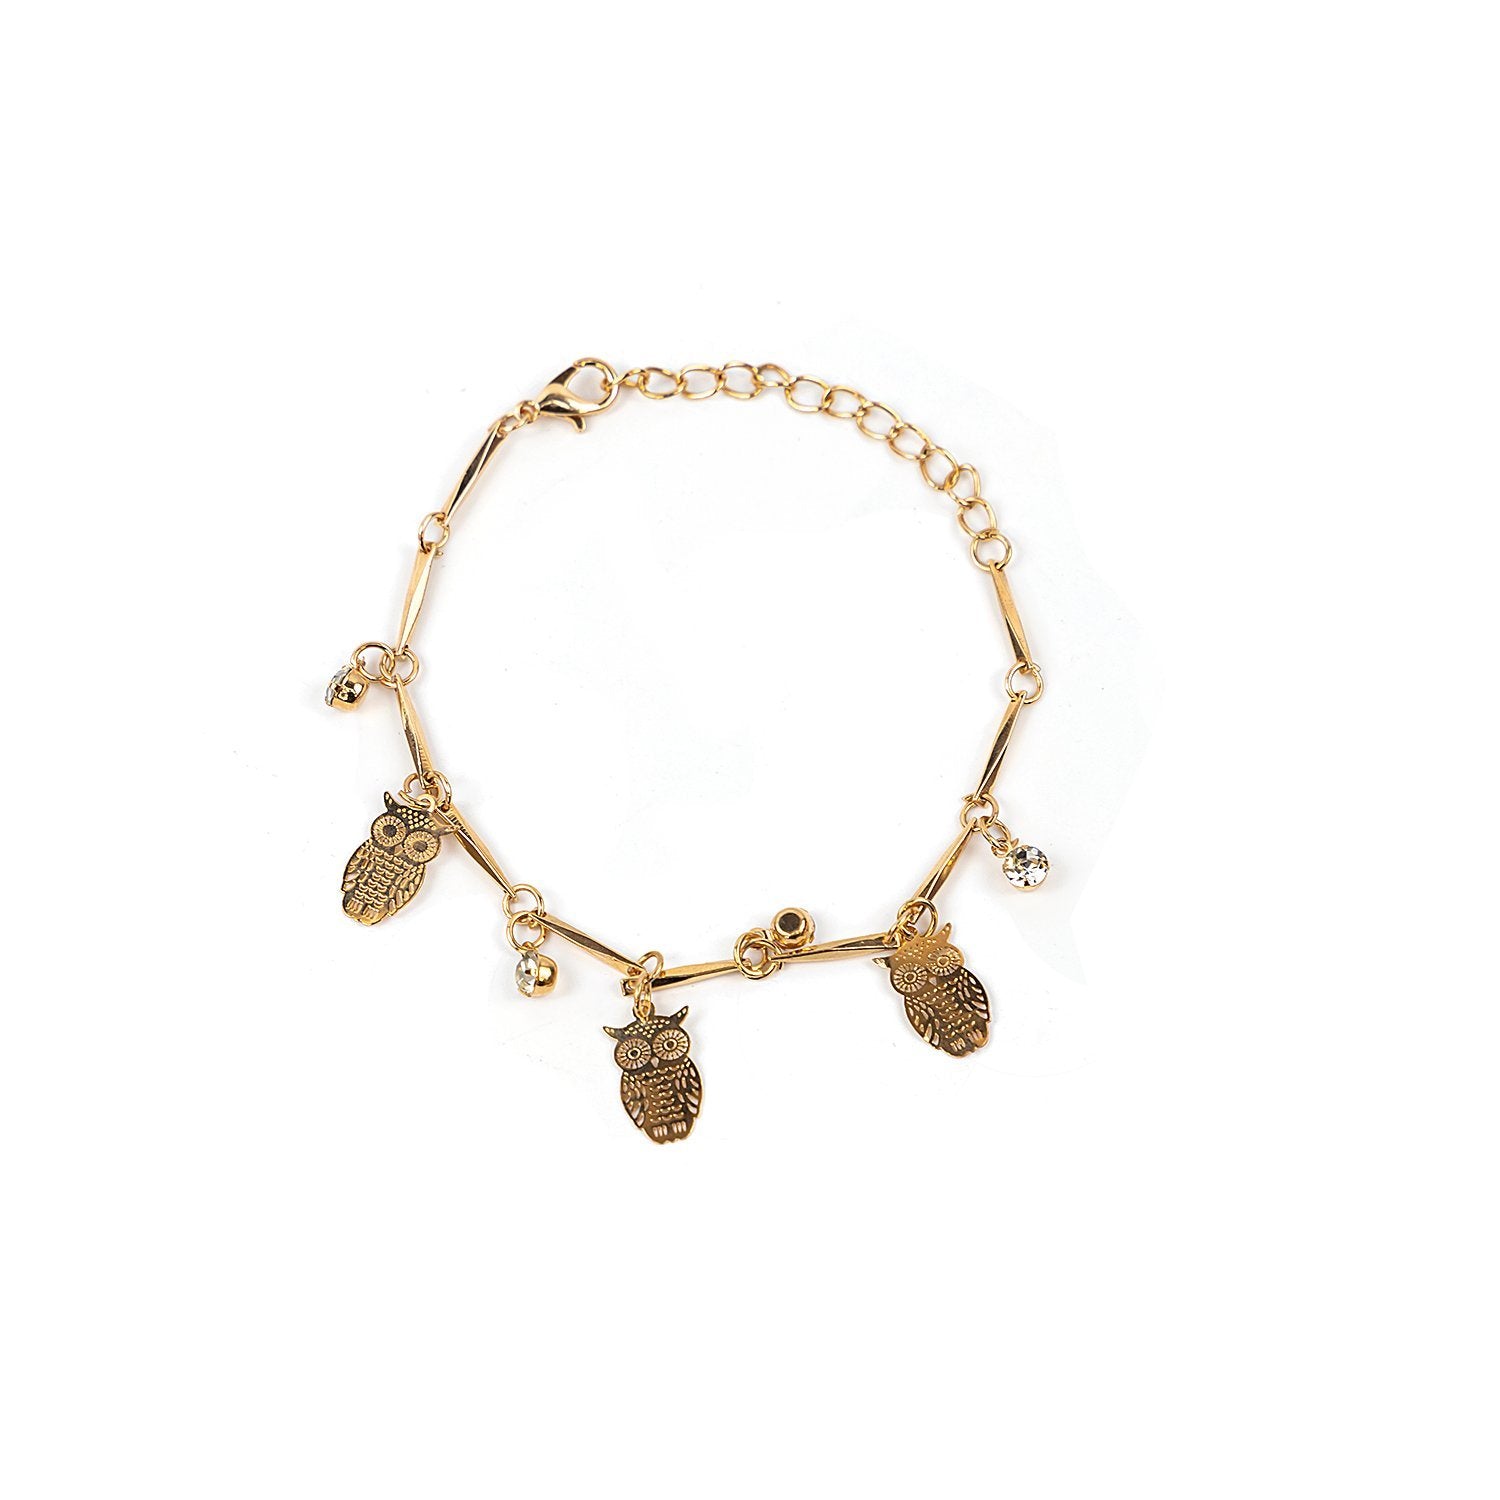 Owl Bracelet Rose Or Gold Plated 925 Silver By Linnet Jewellery   notonthehighstreetcom